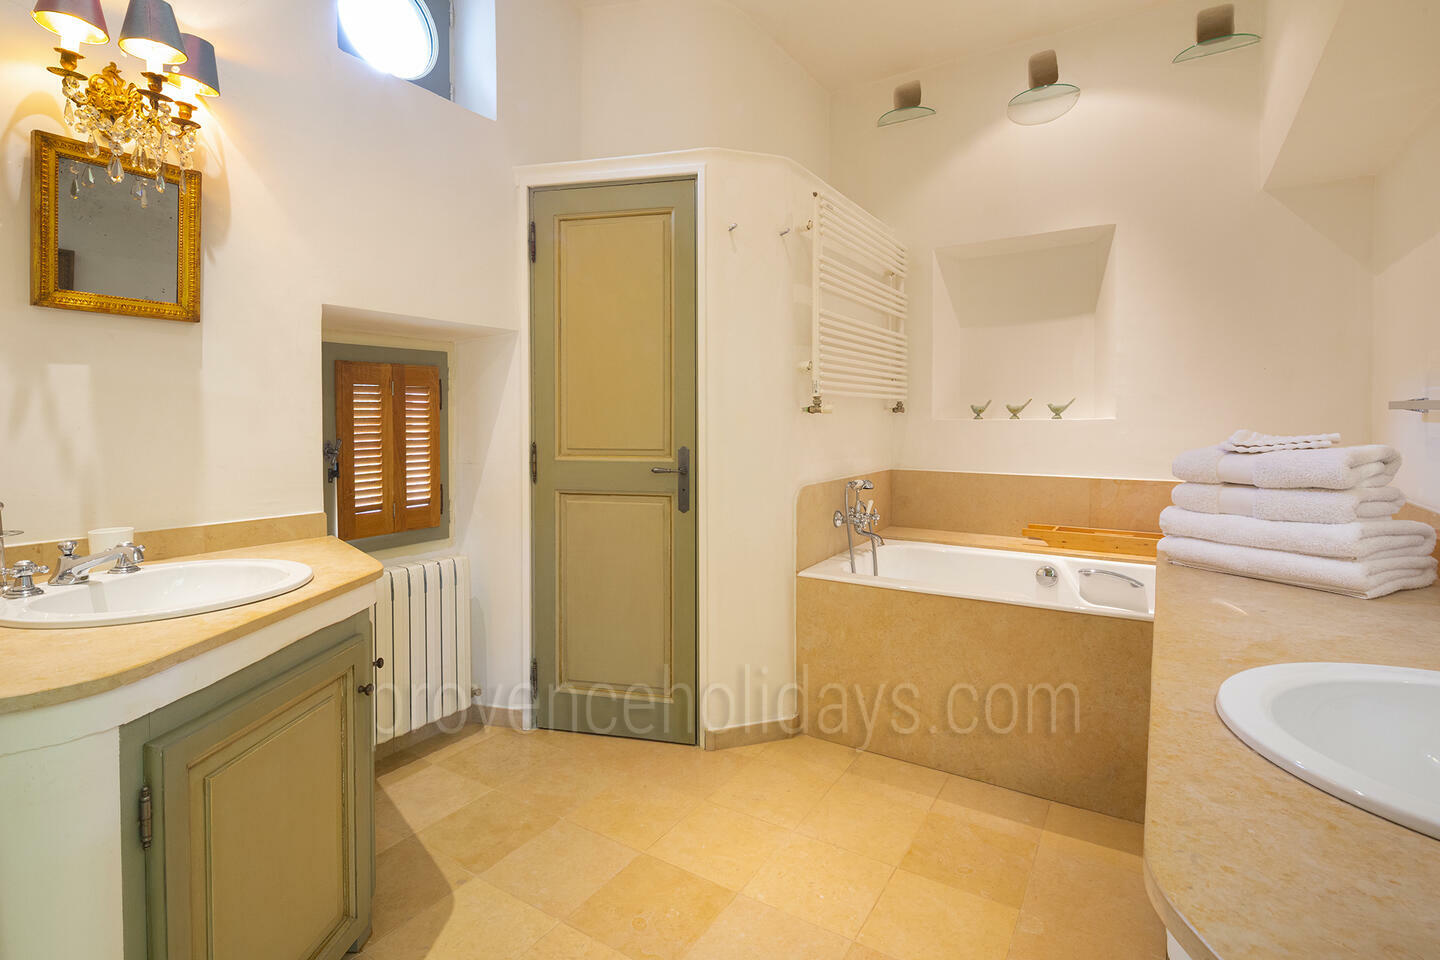 40 - Outstanding Property with Wonderful Views of the Luberon: Villa: Bedroom